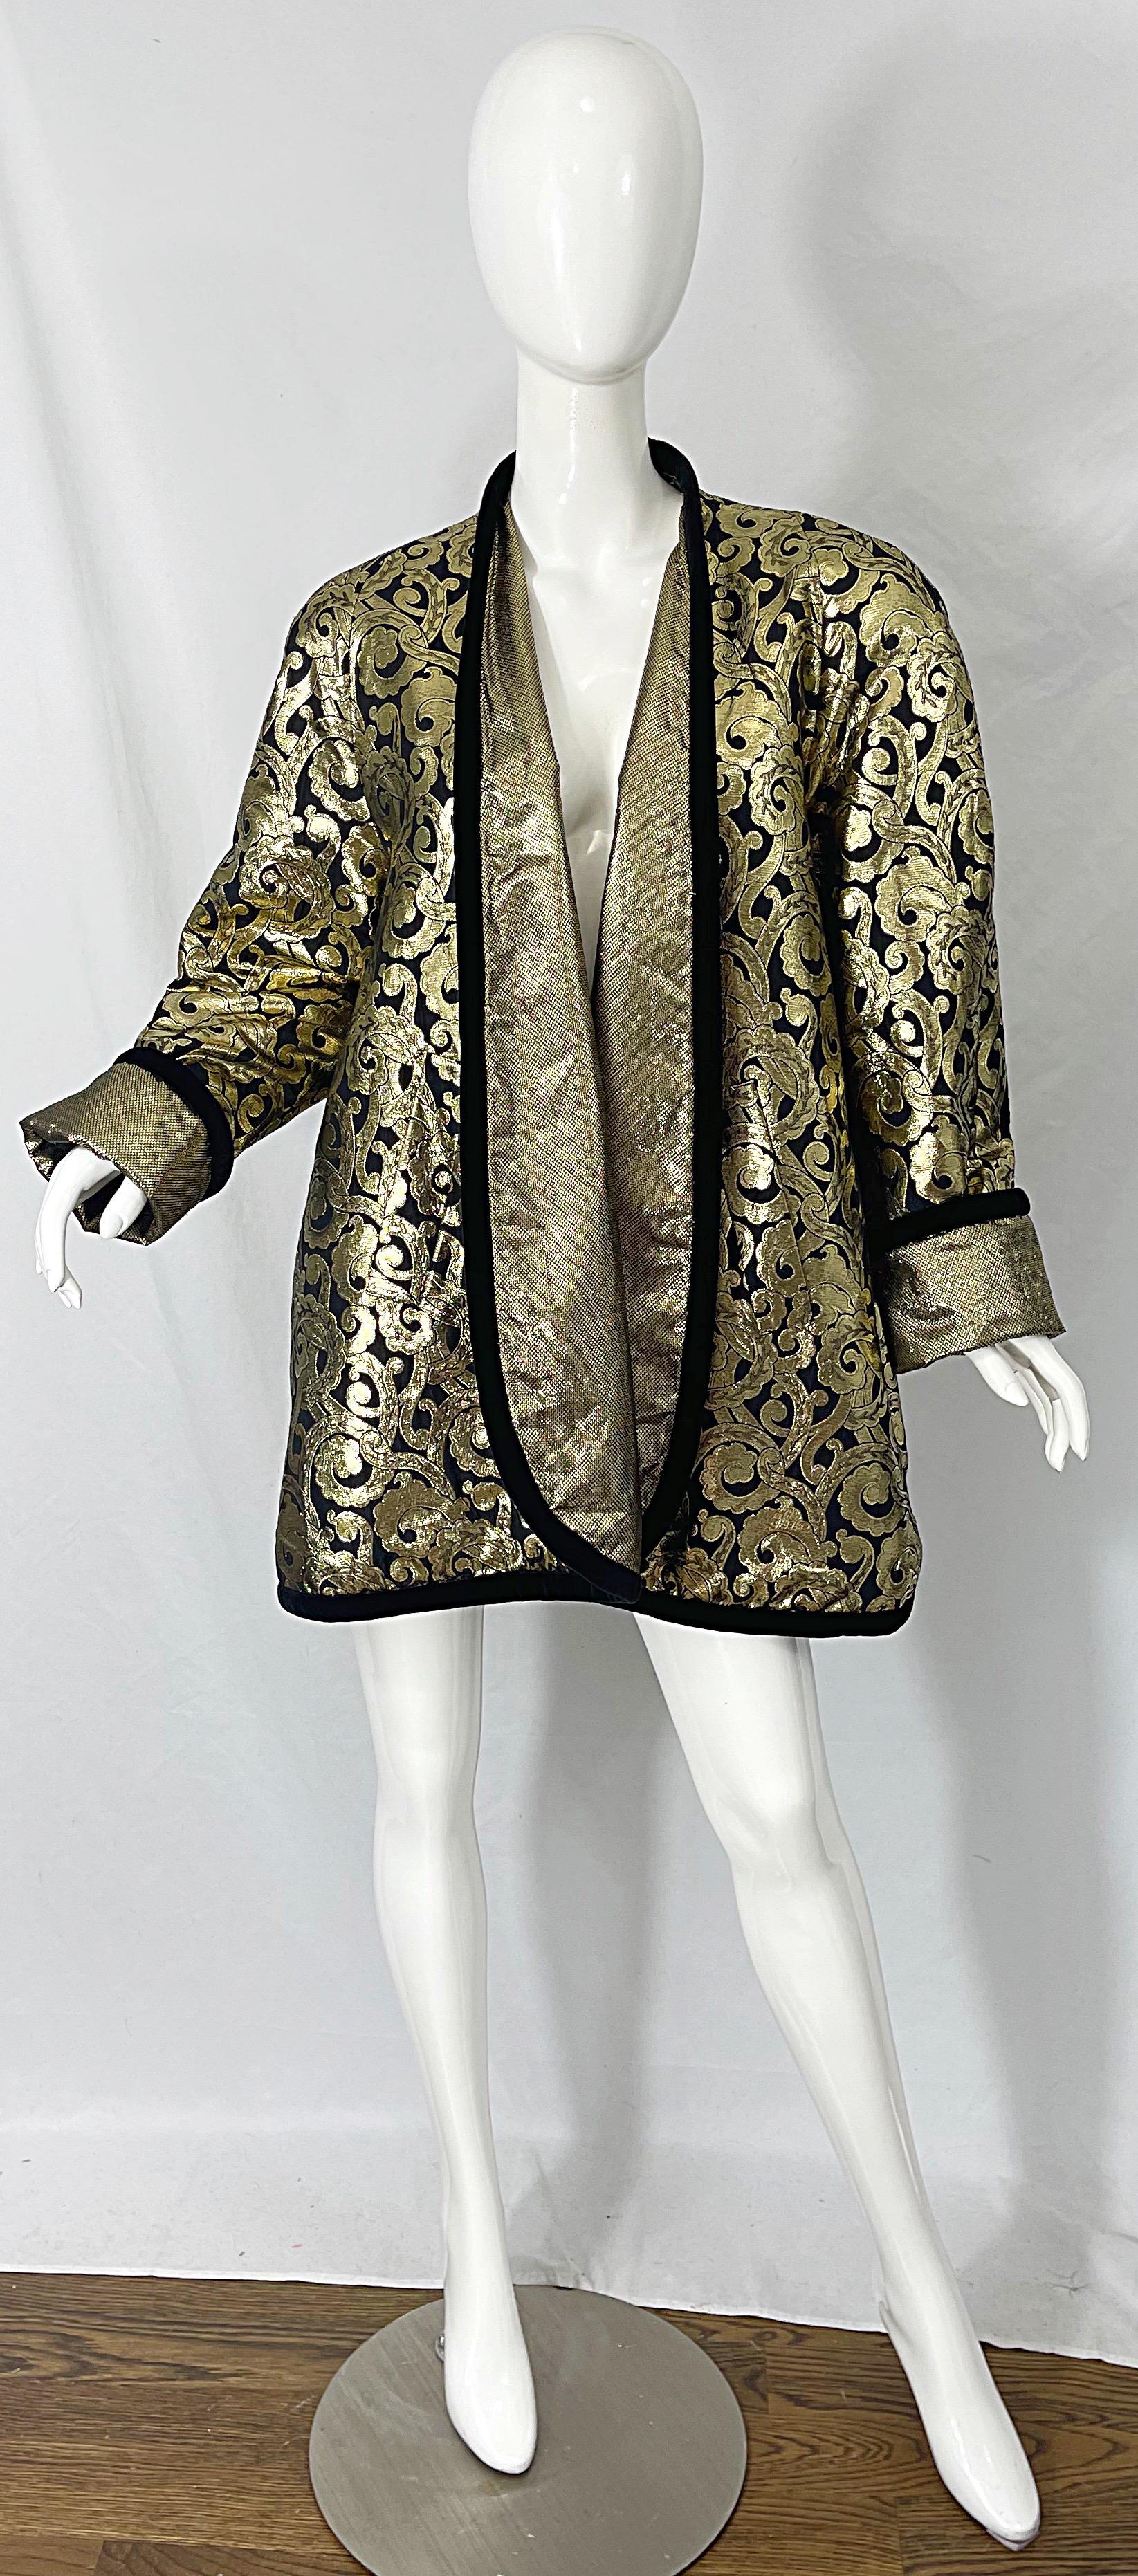 Fabulous late 80s ESCADA by MARGARETHA LEY metallic gold and black silk swing trapeze jacket ! Features a regal print throughout with black silk velvet trim. Can easily be dressed up or down. Pair with a dress for evening wear, or with jeans or